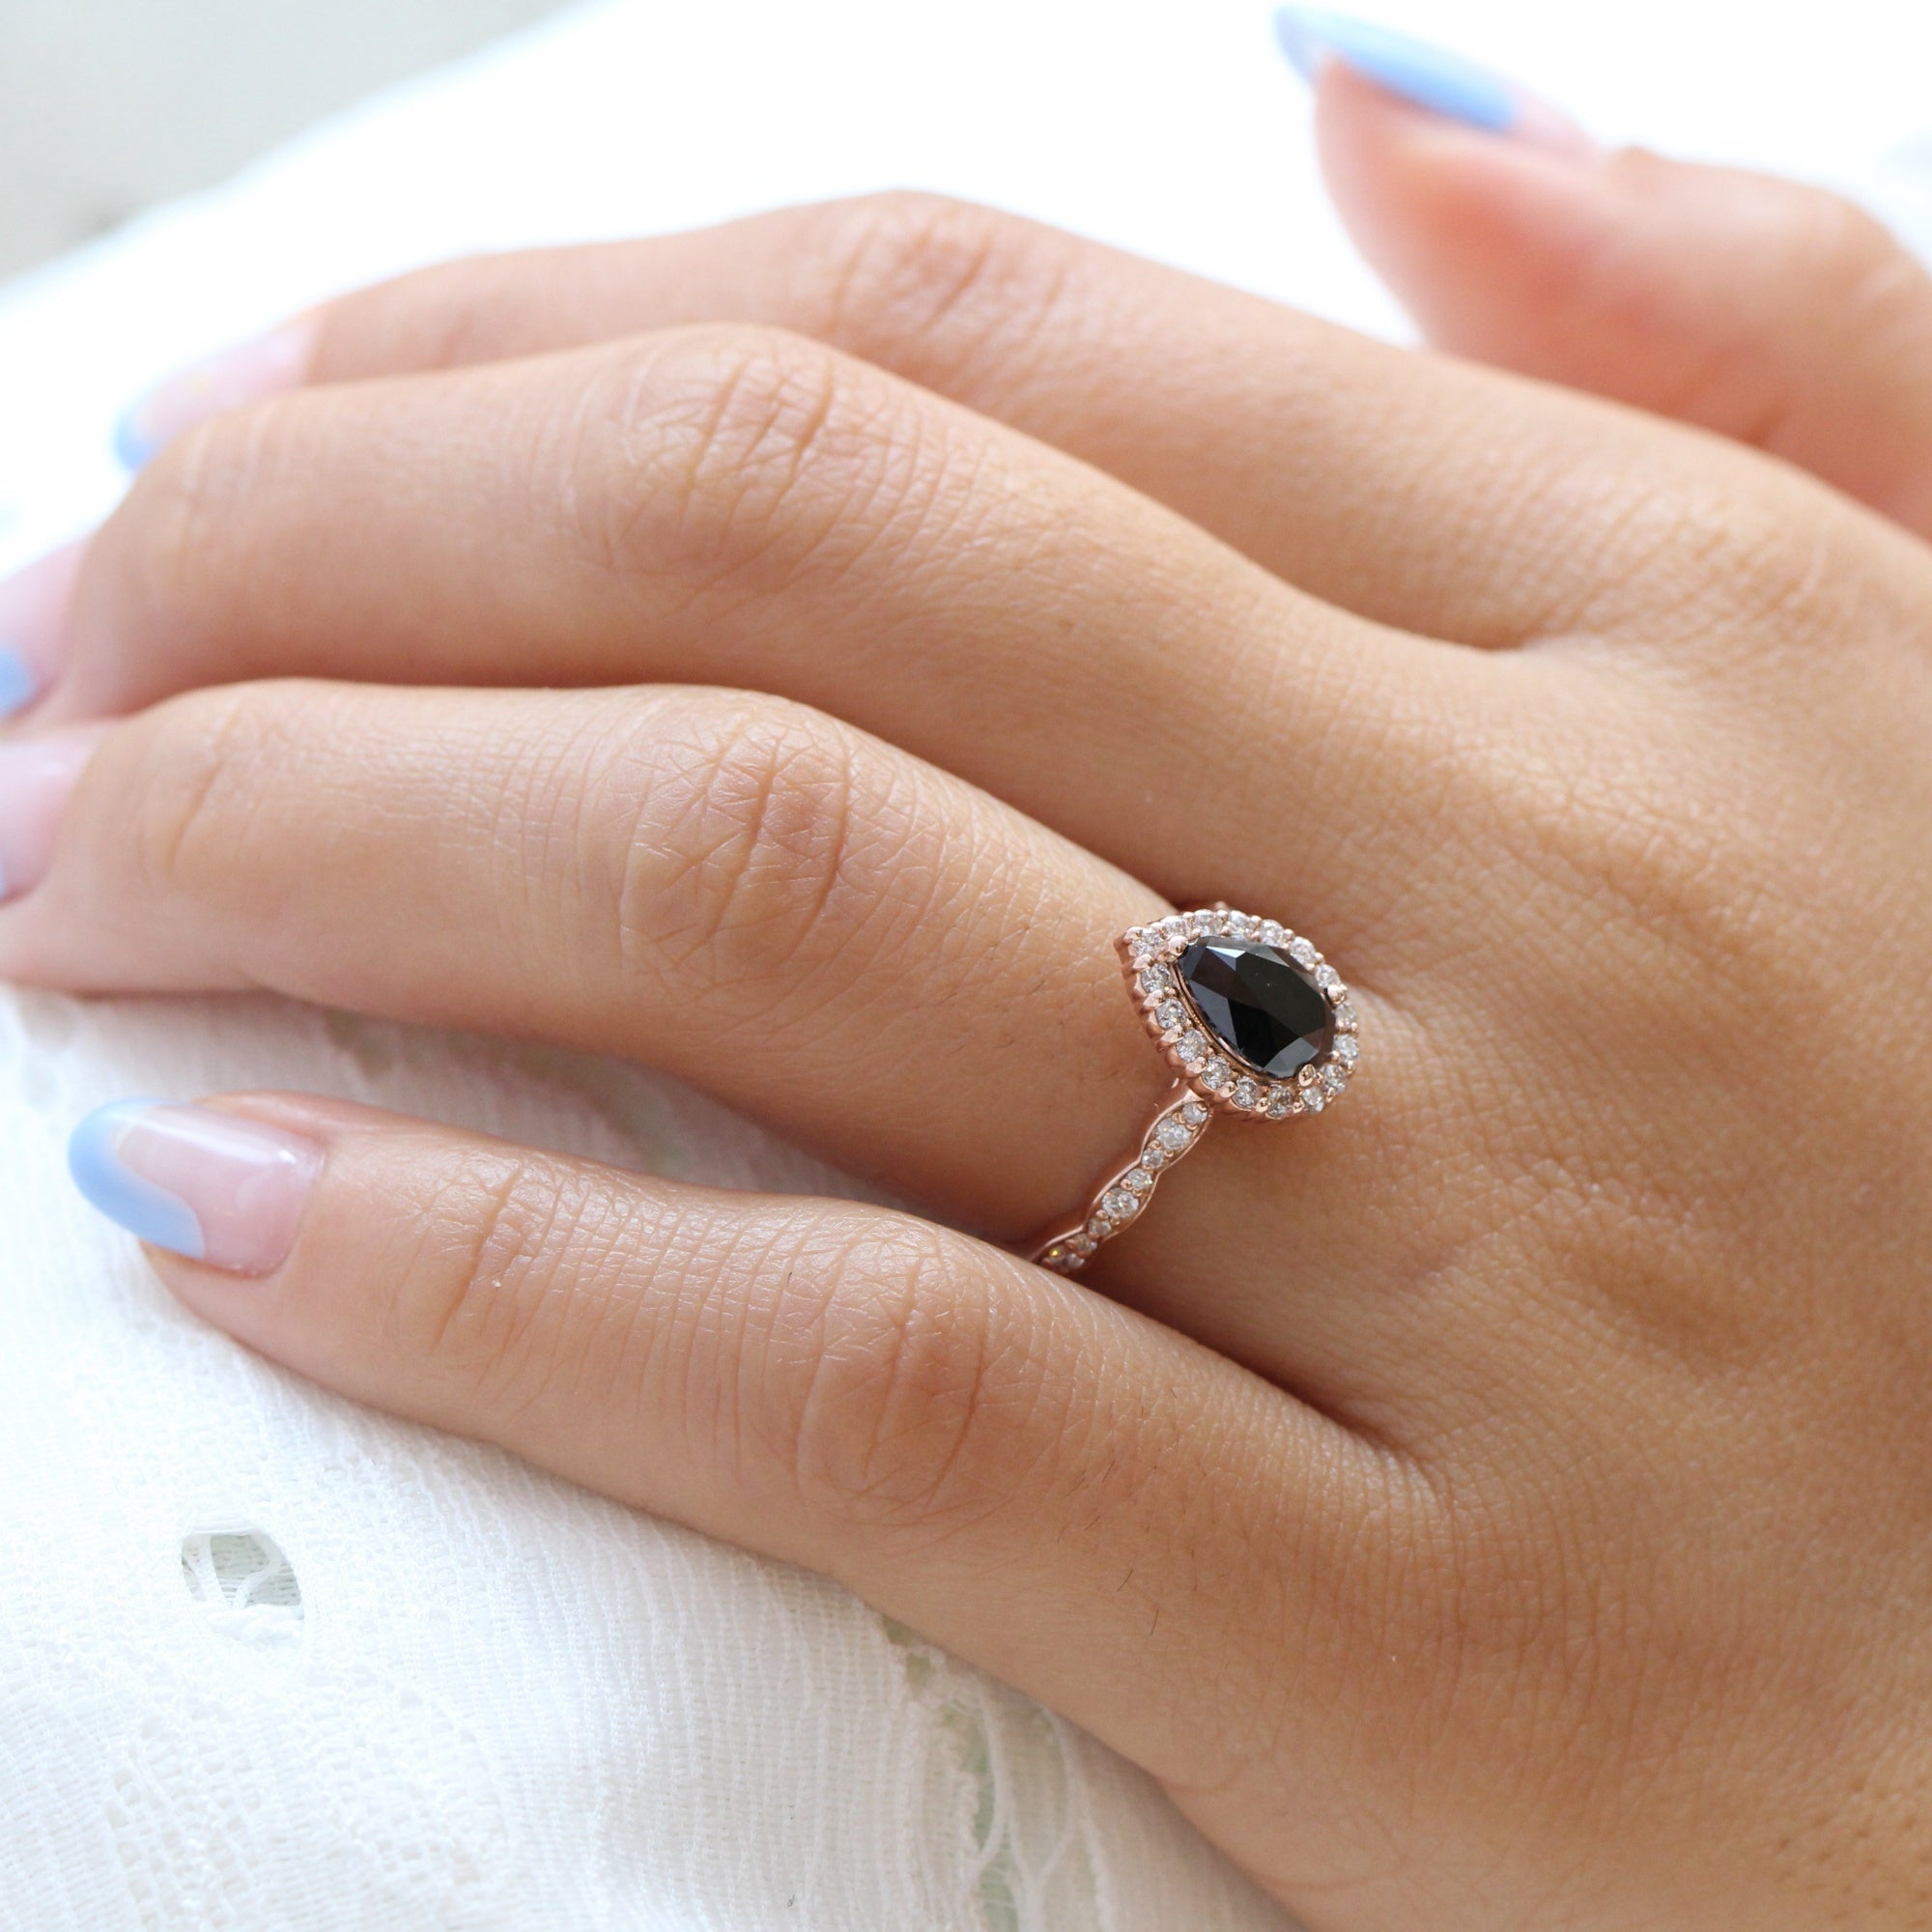 A silver diamond ring for engagement